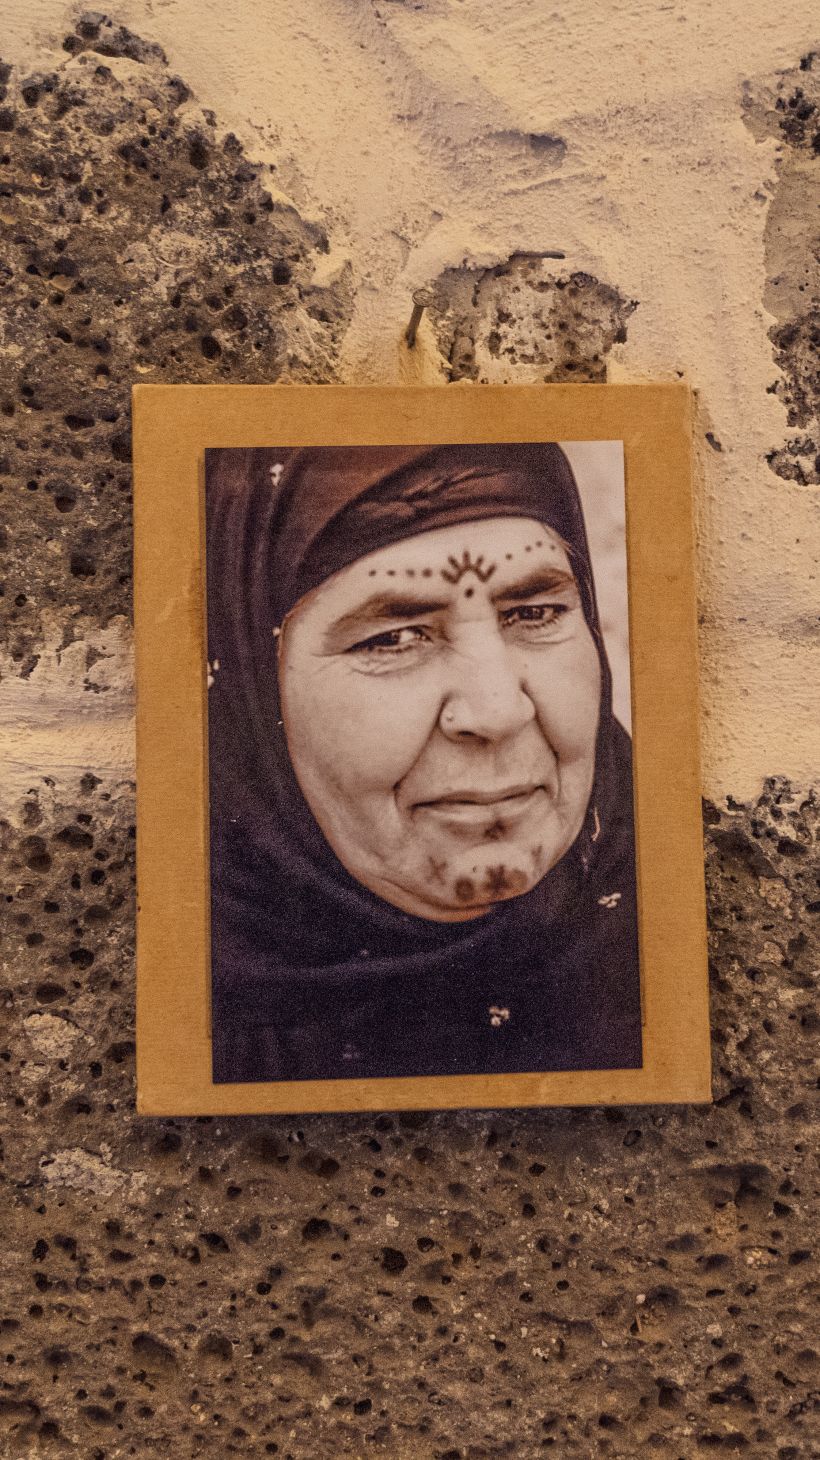 A photo of a photo hanging in Temel’s studio, showing an elderly woman adorning a symbolic sun motif on her forehead.